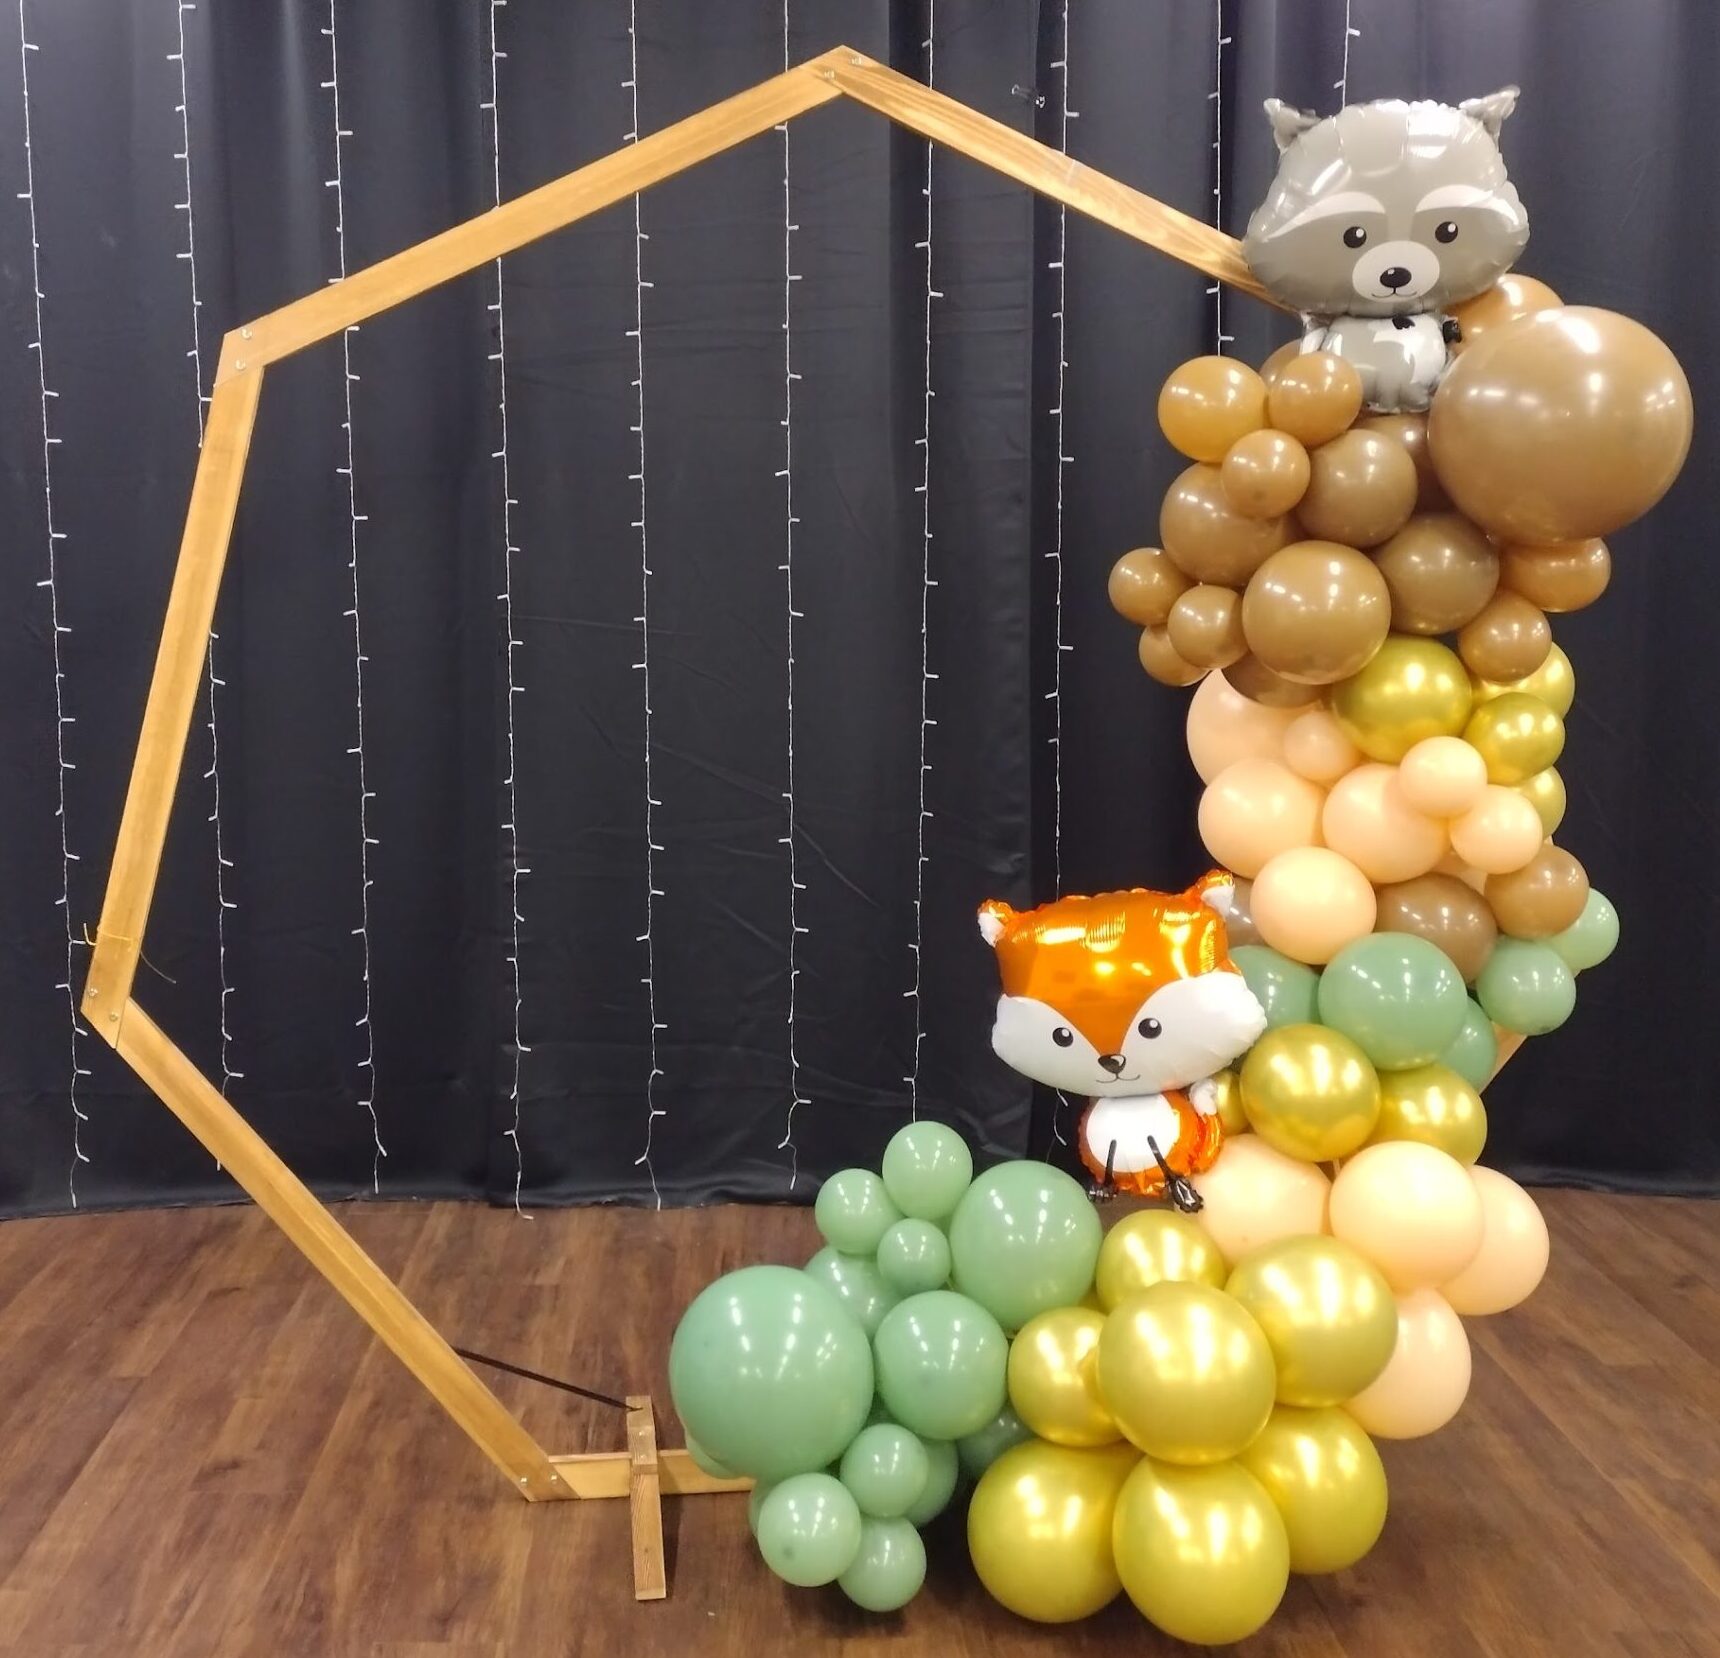 Balloon Arch featuring woodland theme balloons